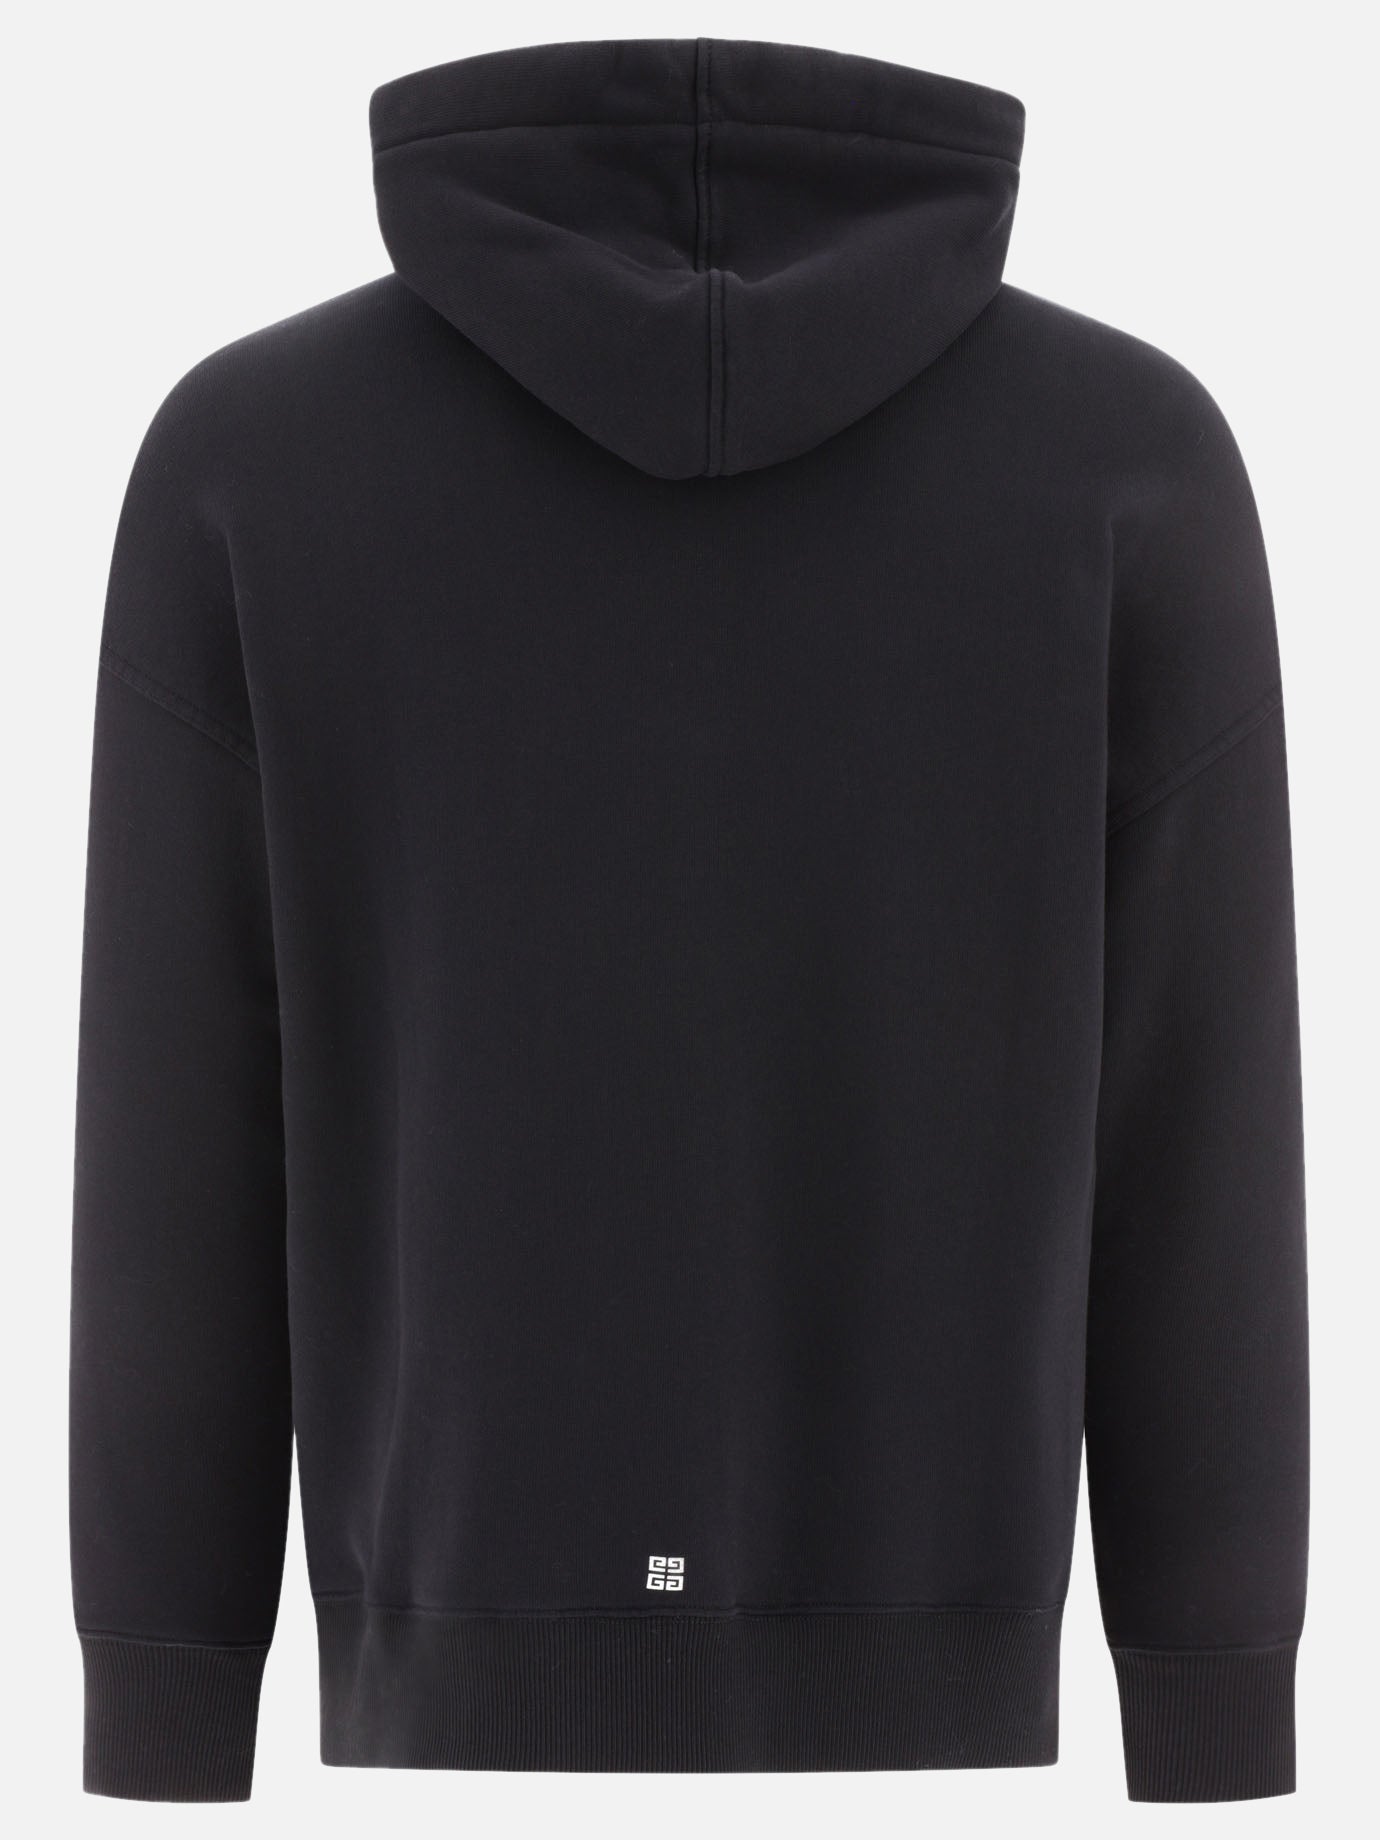 "GIVENCHY Archetype" hoodie